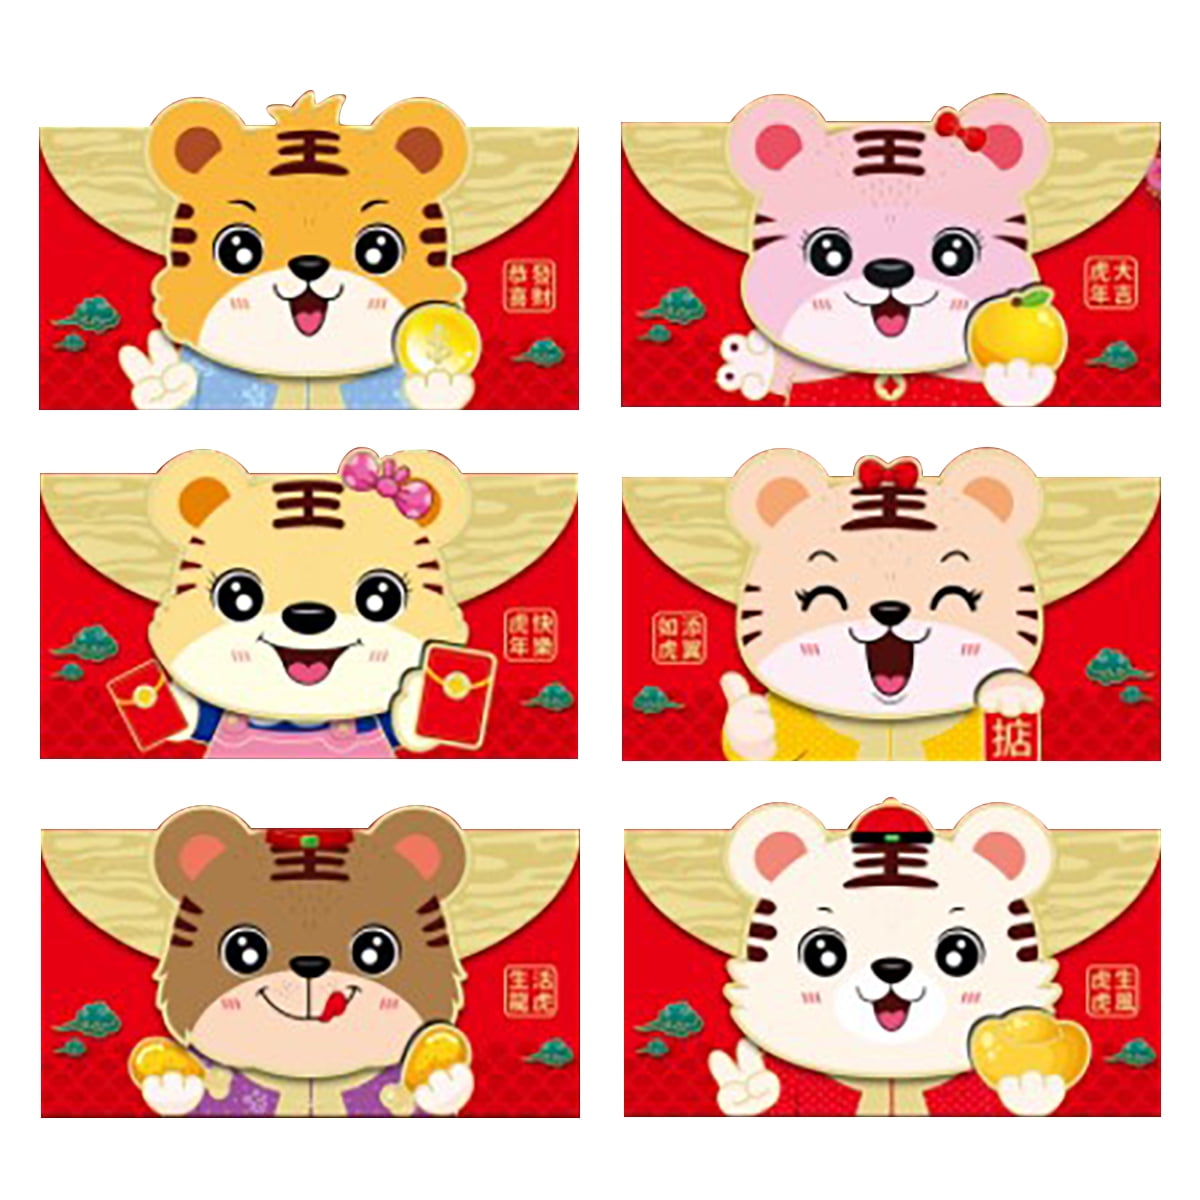 Toorise 6pcs Red Envelopes Color Printing Red Packet 18x9cm Cute Tiger  Chinese Spring Festival Red Envelope Lucky Money Gift Hongbao for New Year